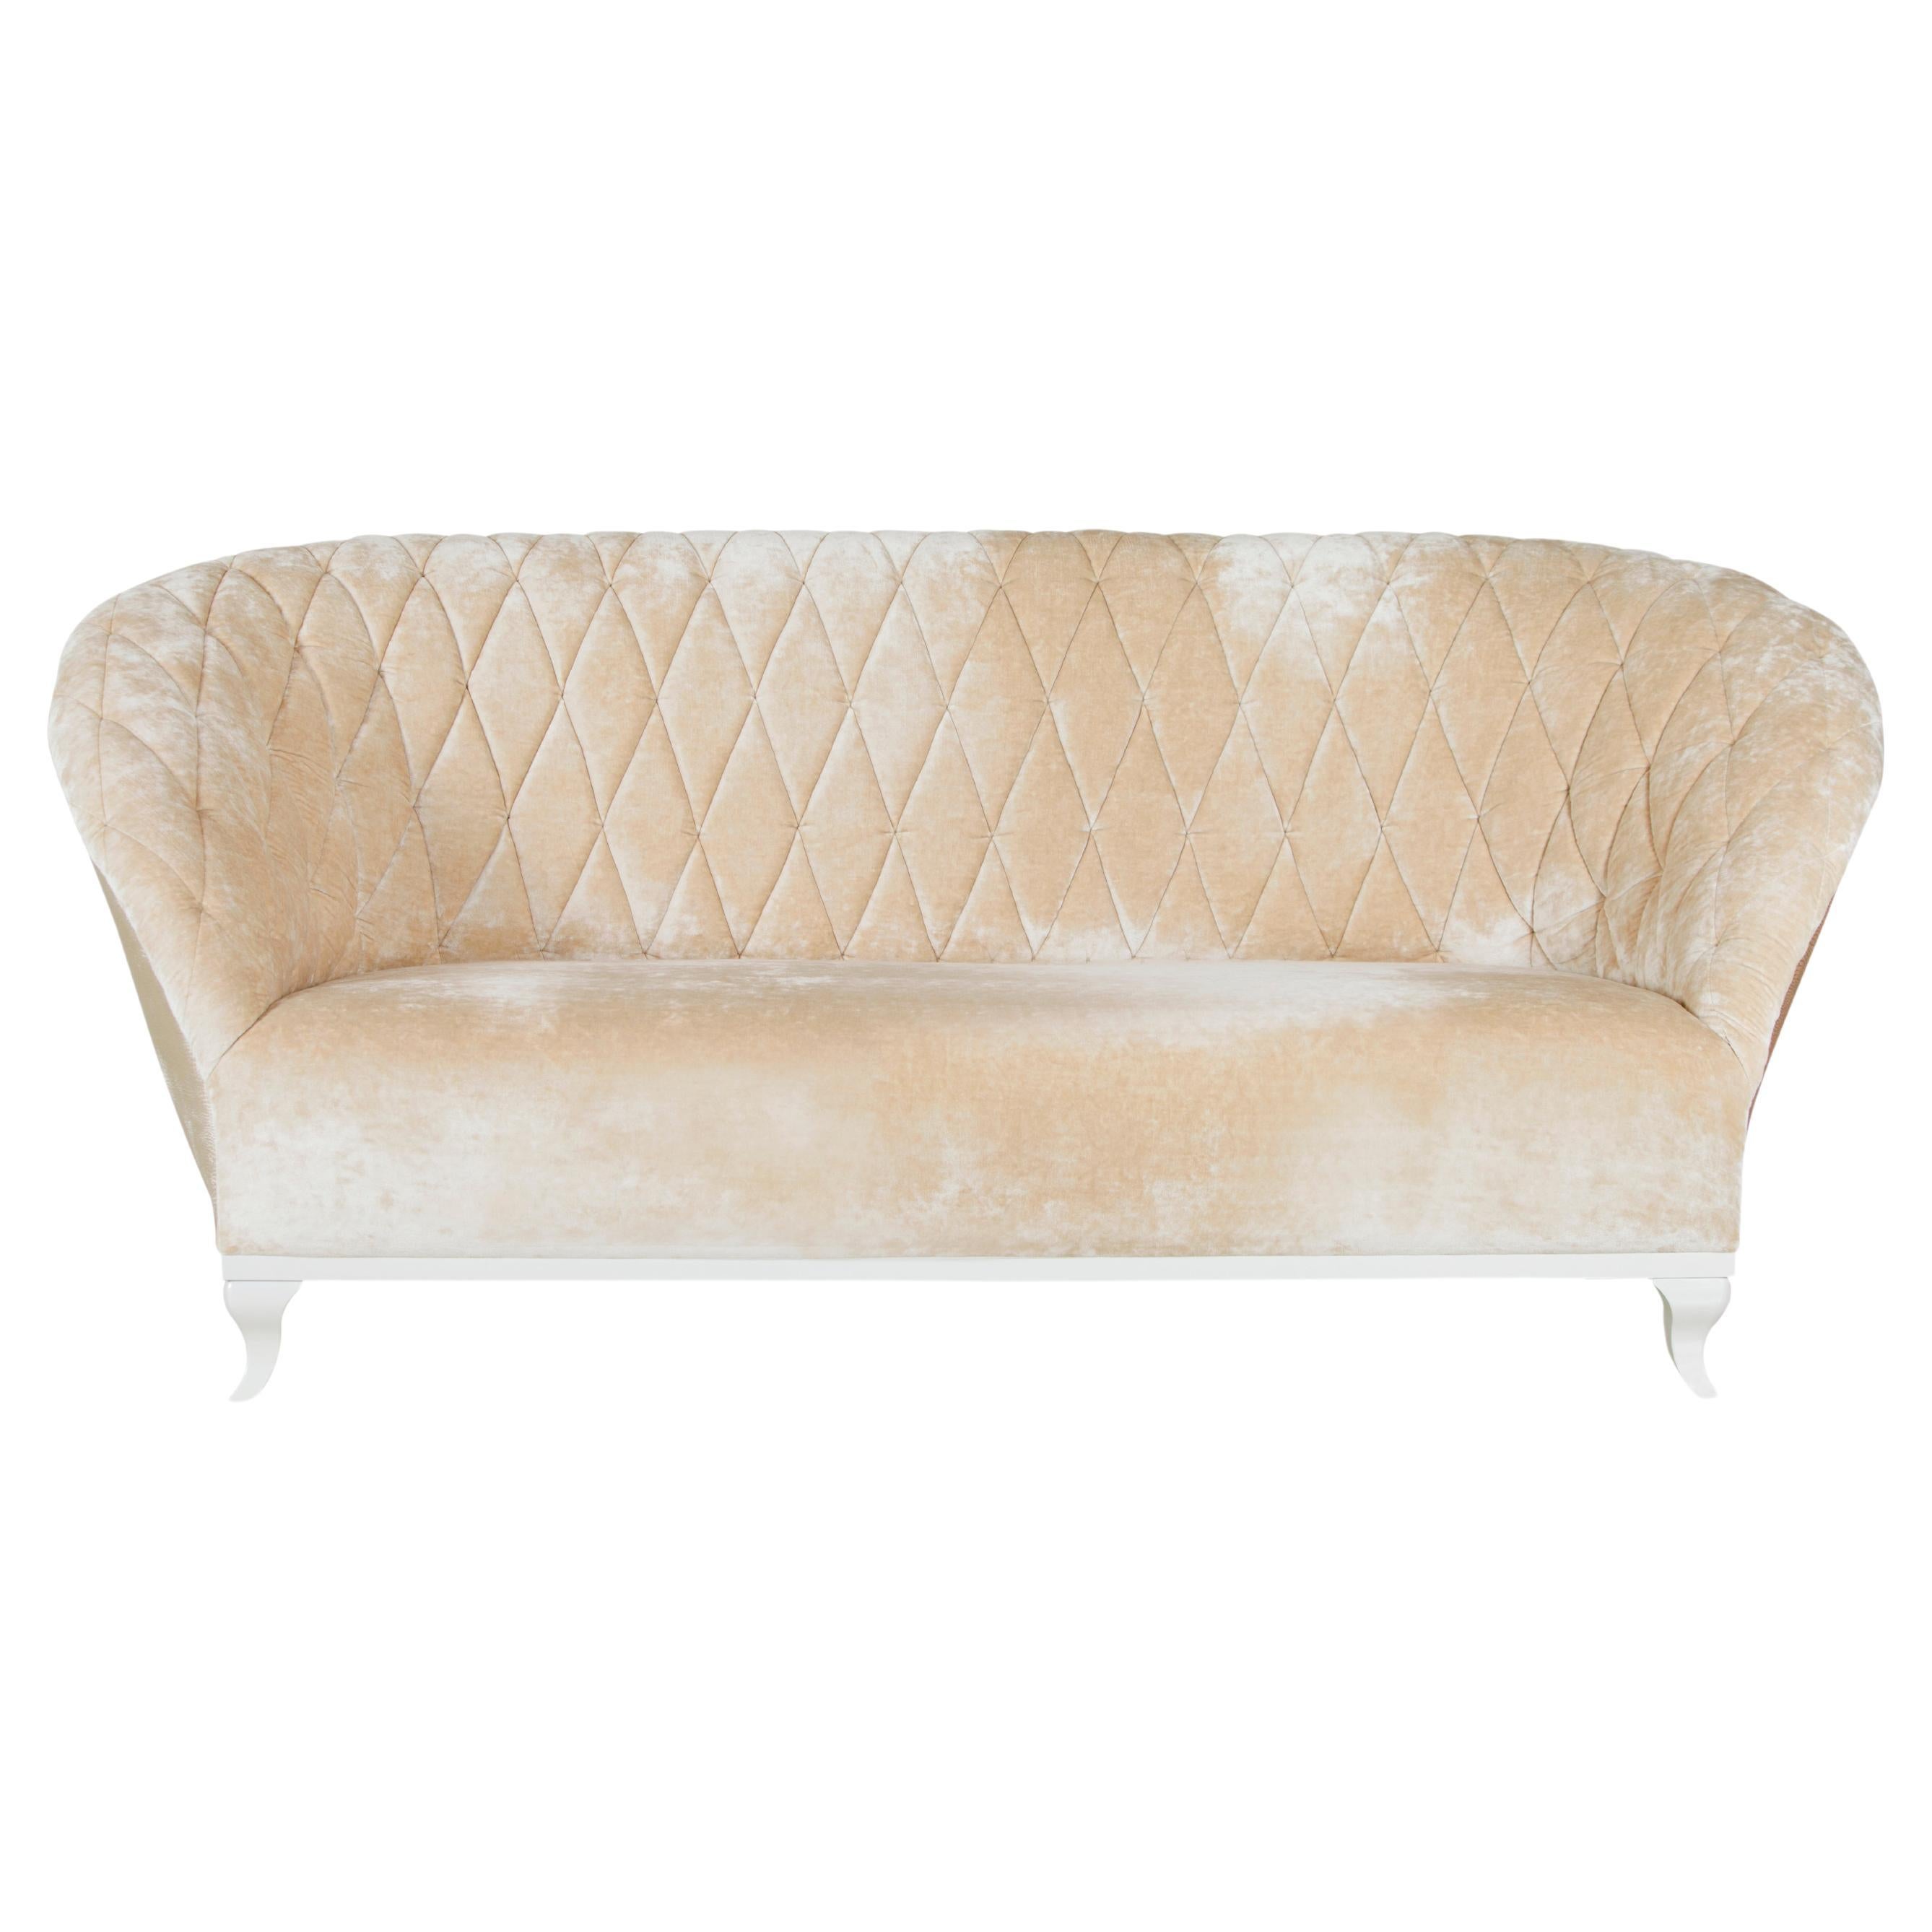 Contemporary Art Deco Poppi Sofa in the Style of 1930's, Handmade in Portugal by Greenapple For Sale